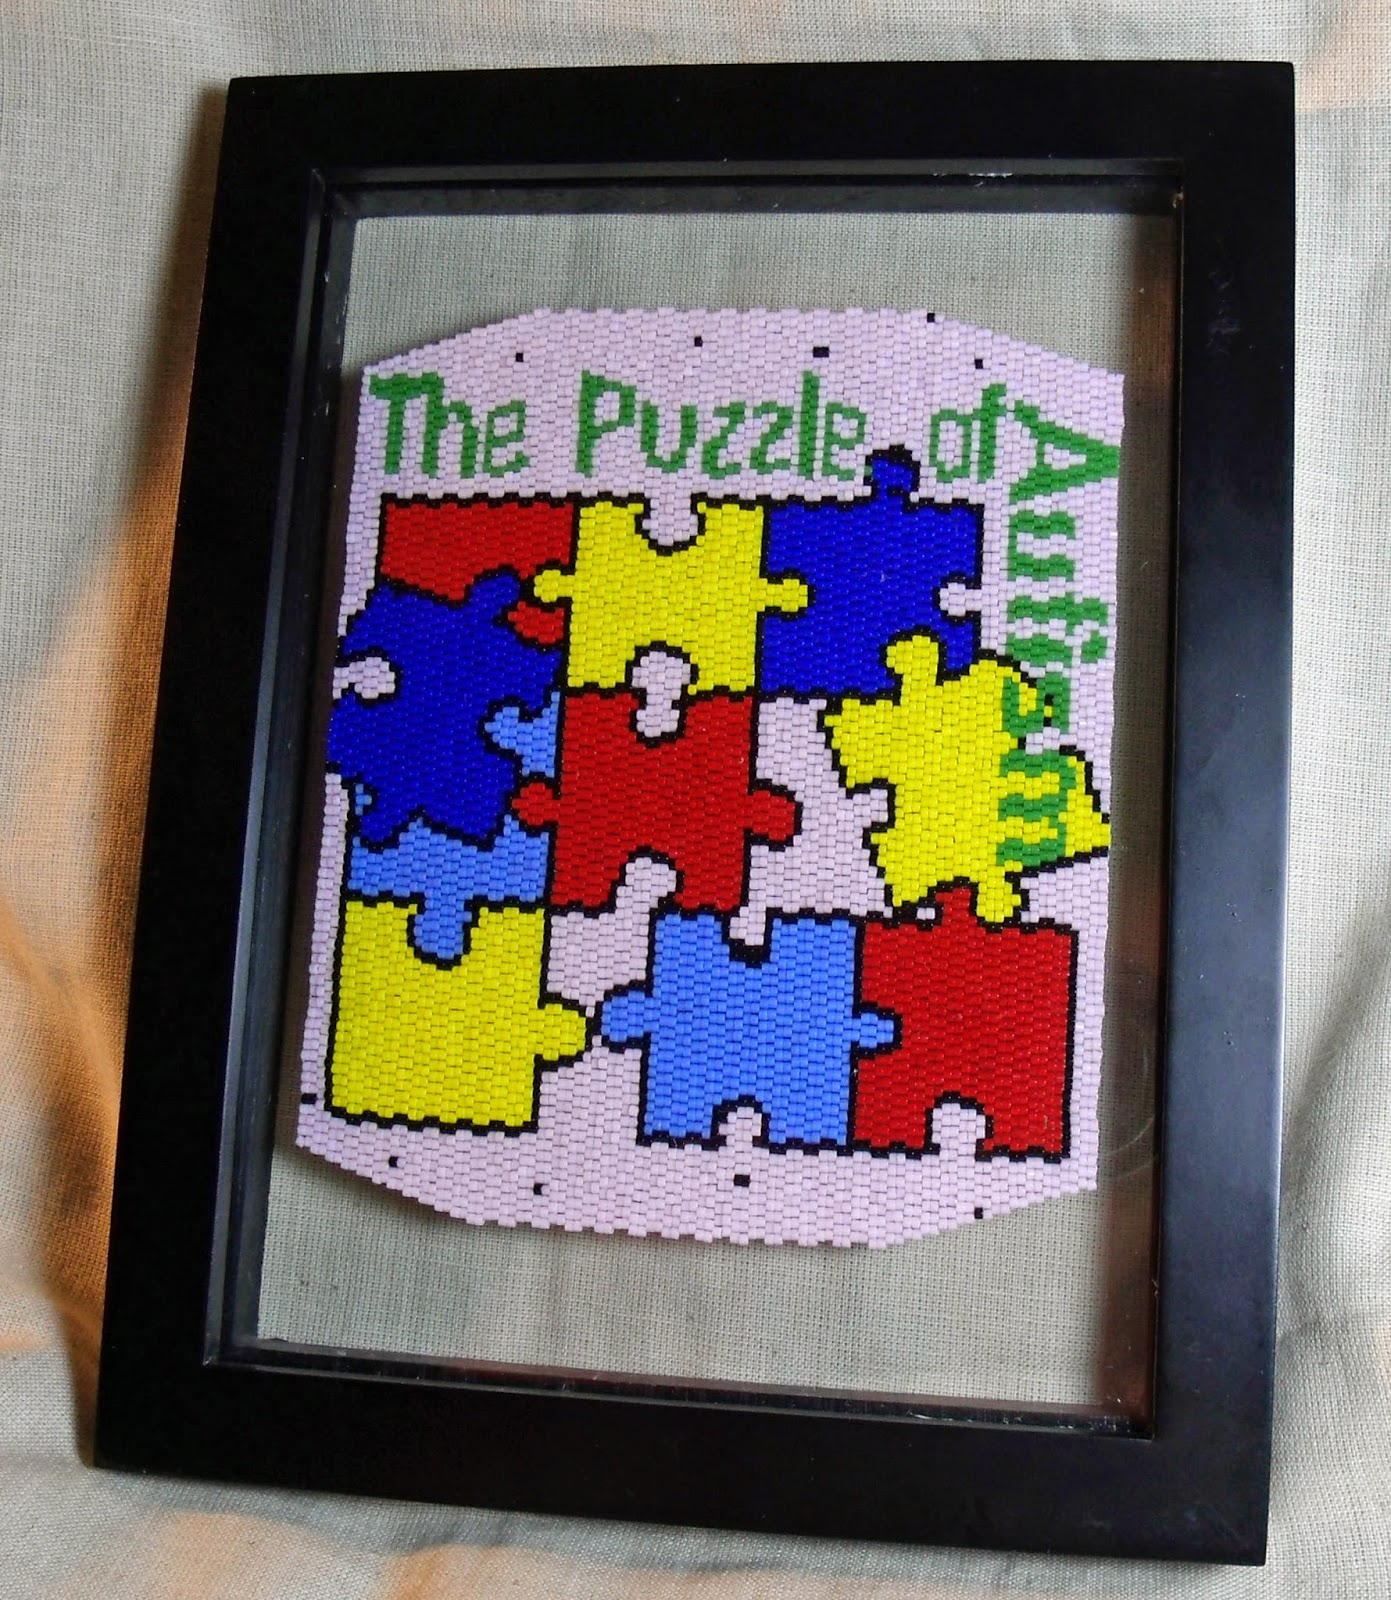 http://www.artfire.com/ext/shop/product_view/KraftyMax/4096681/The_Puzzle_of_Autism_Framed_Fully_Beadwoven_Artwork/Mixed_Media/Wall_Hangings